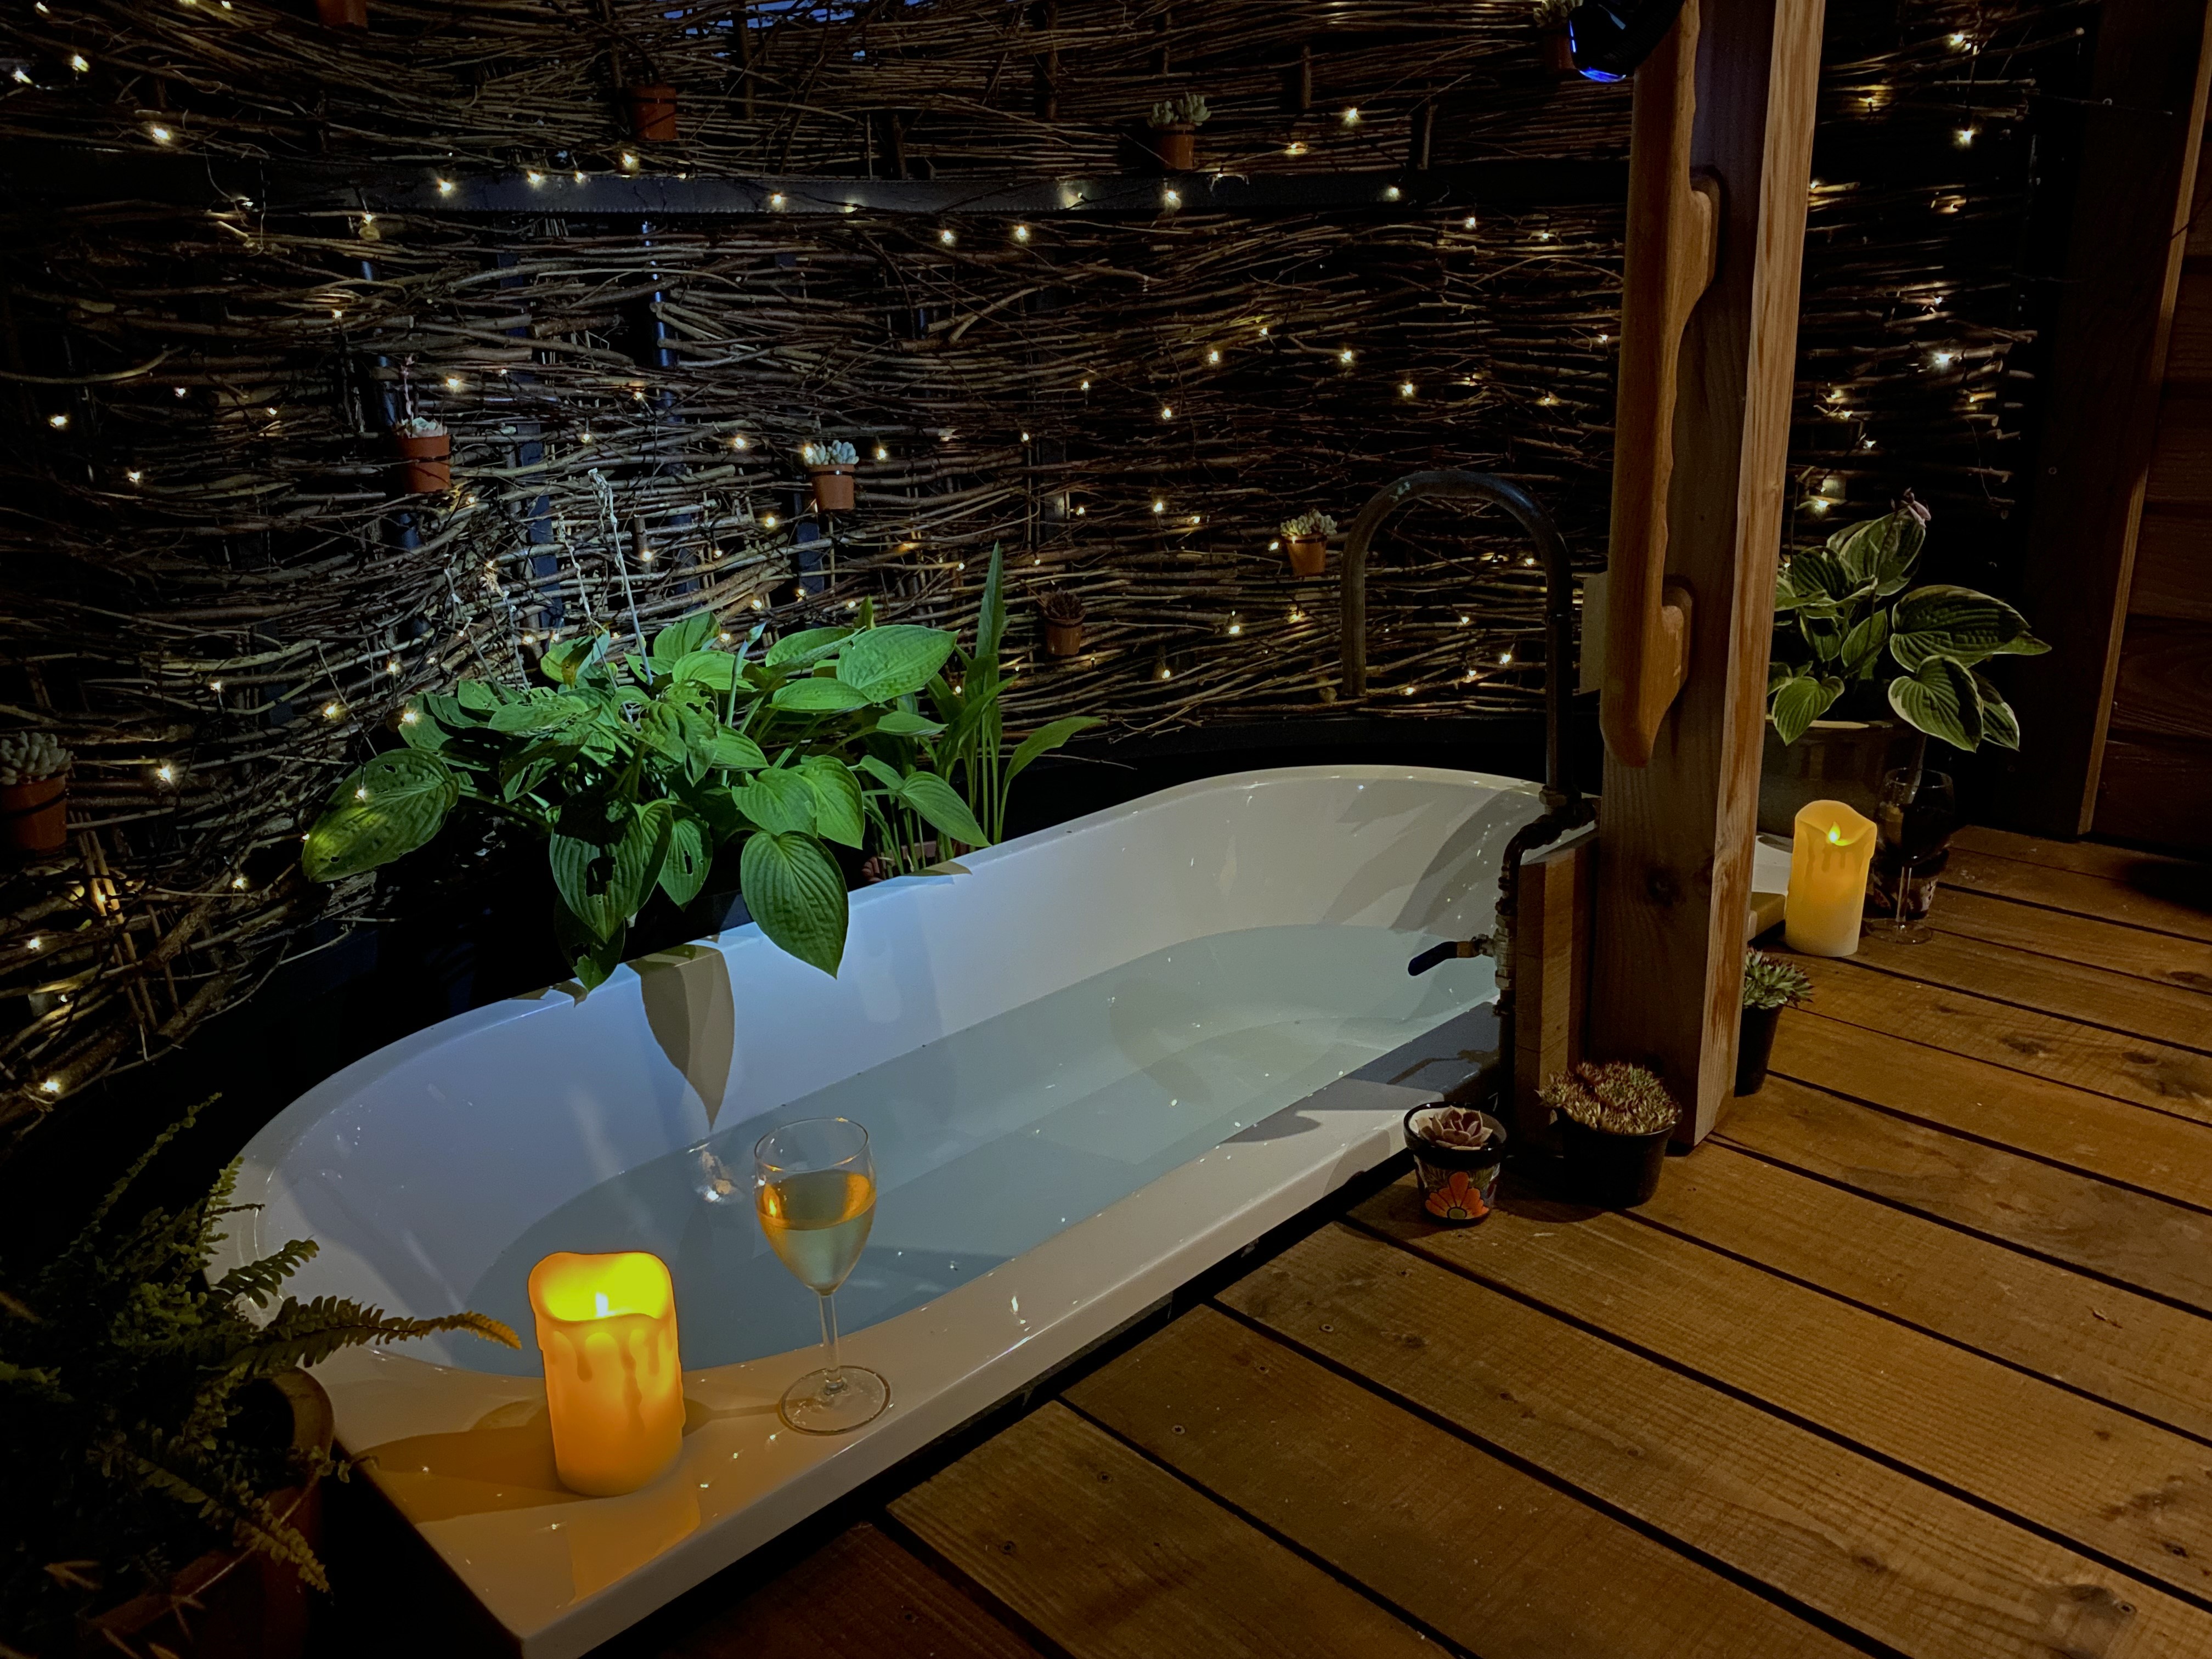 A relaxing bath at night